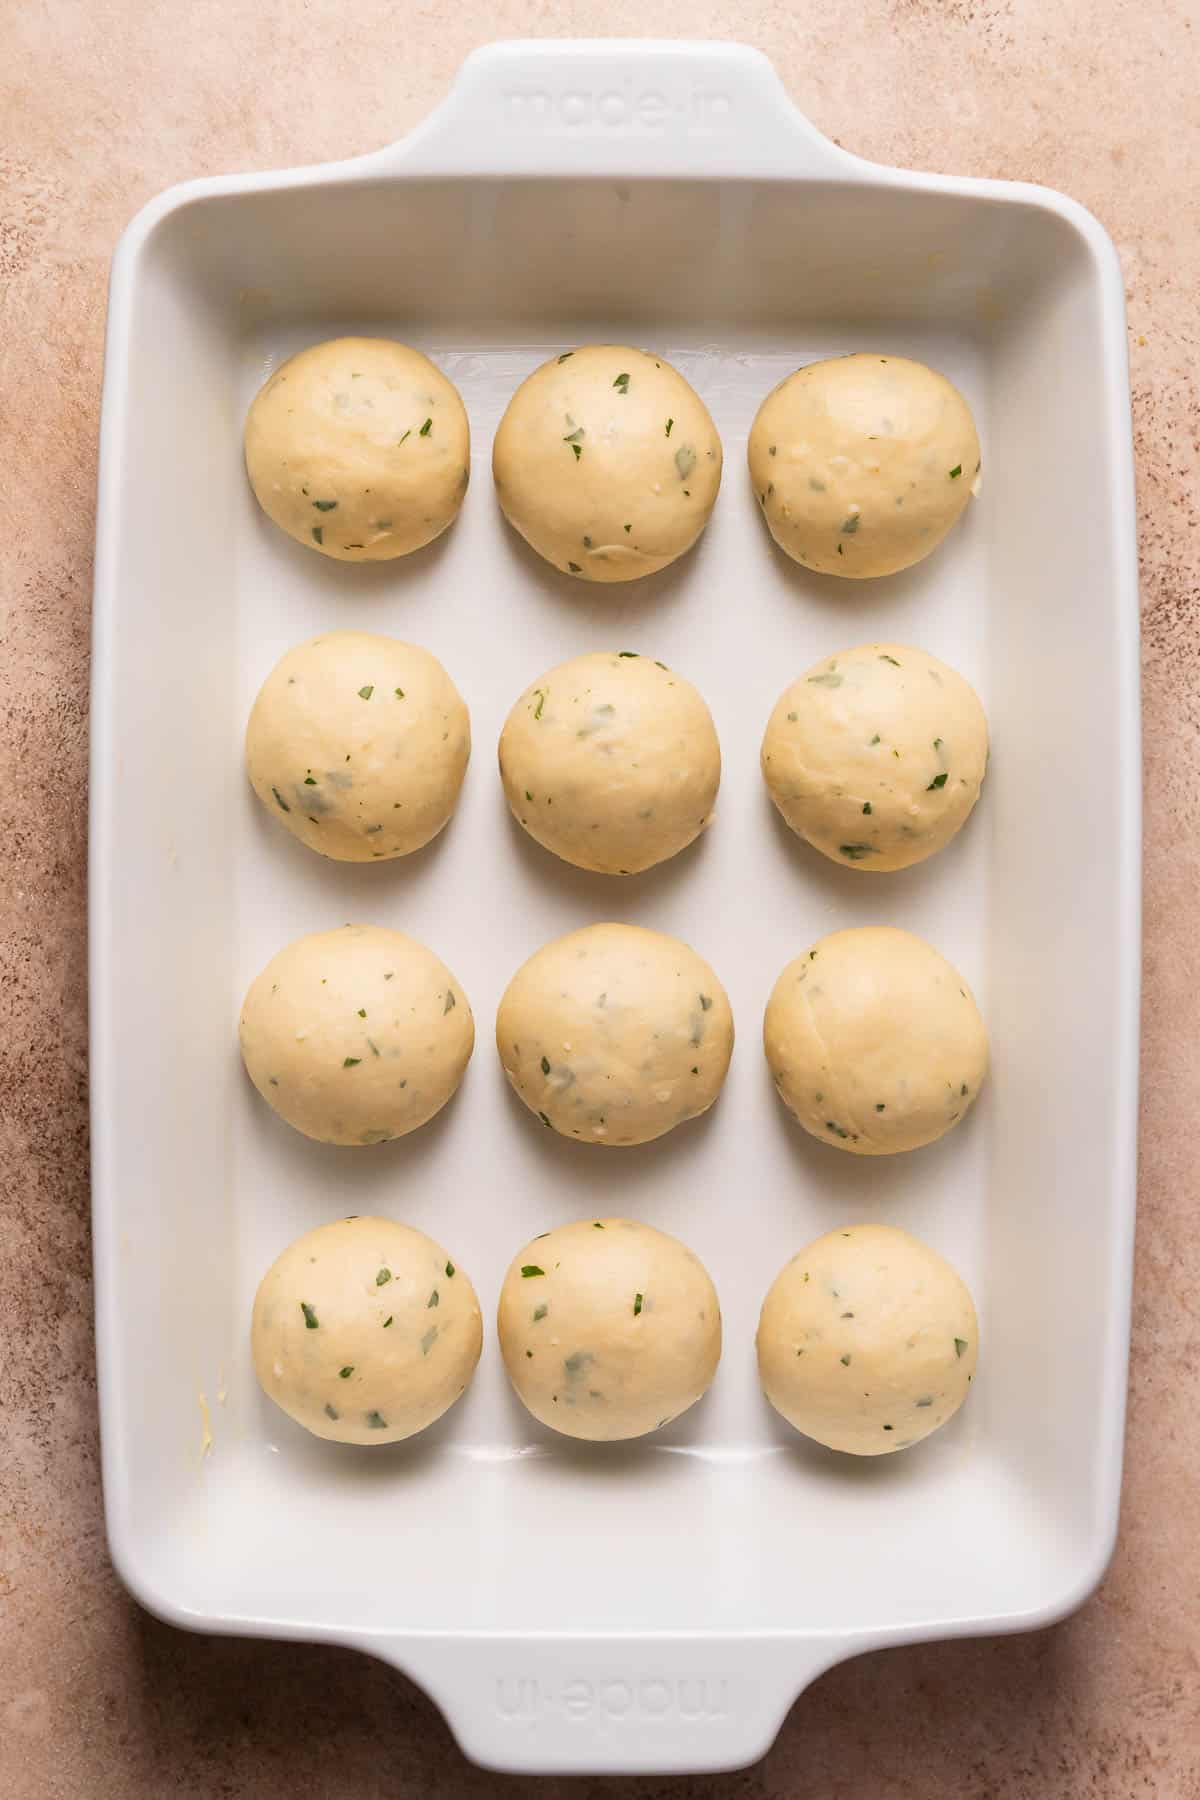 A baking pan with the garlic bread rolls before they've risen.